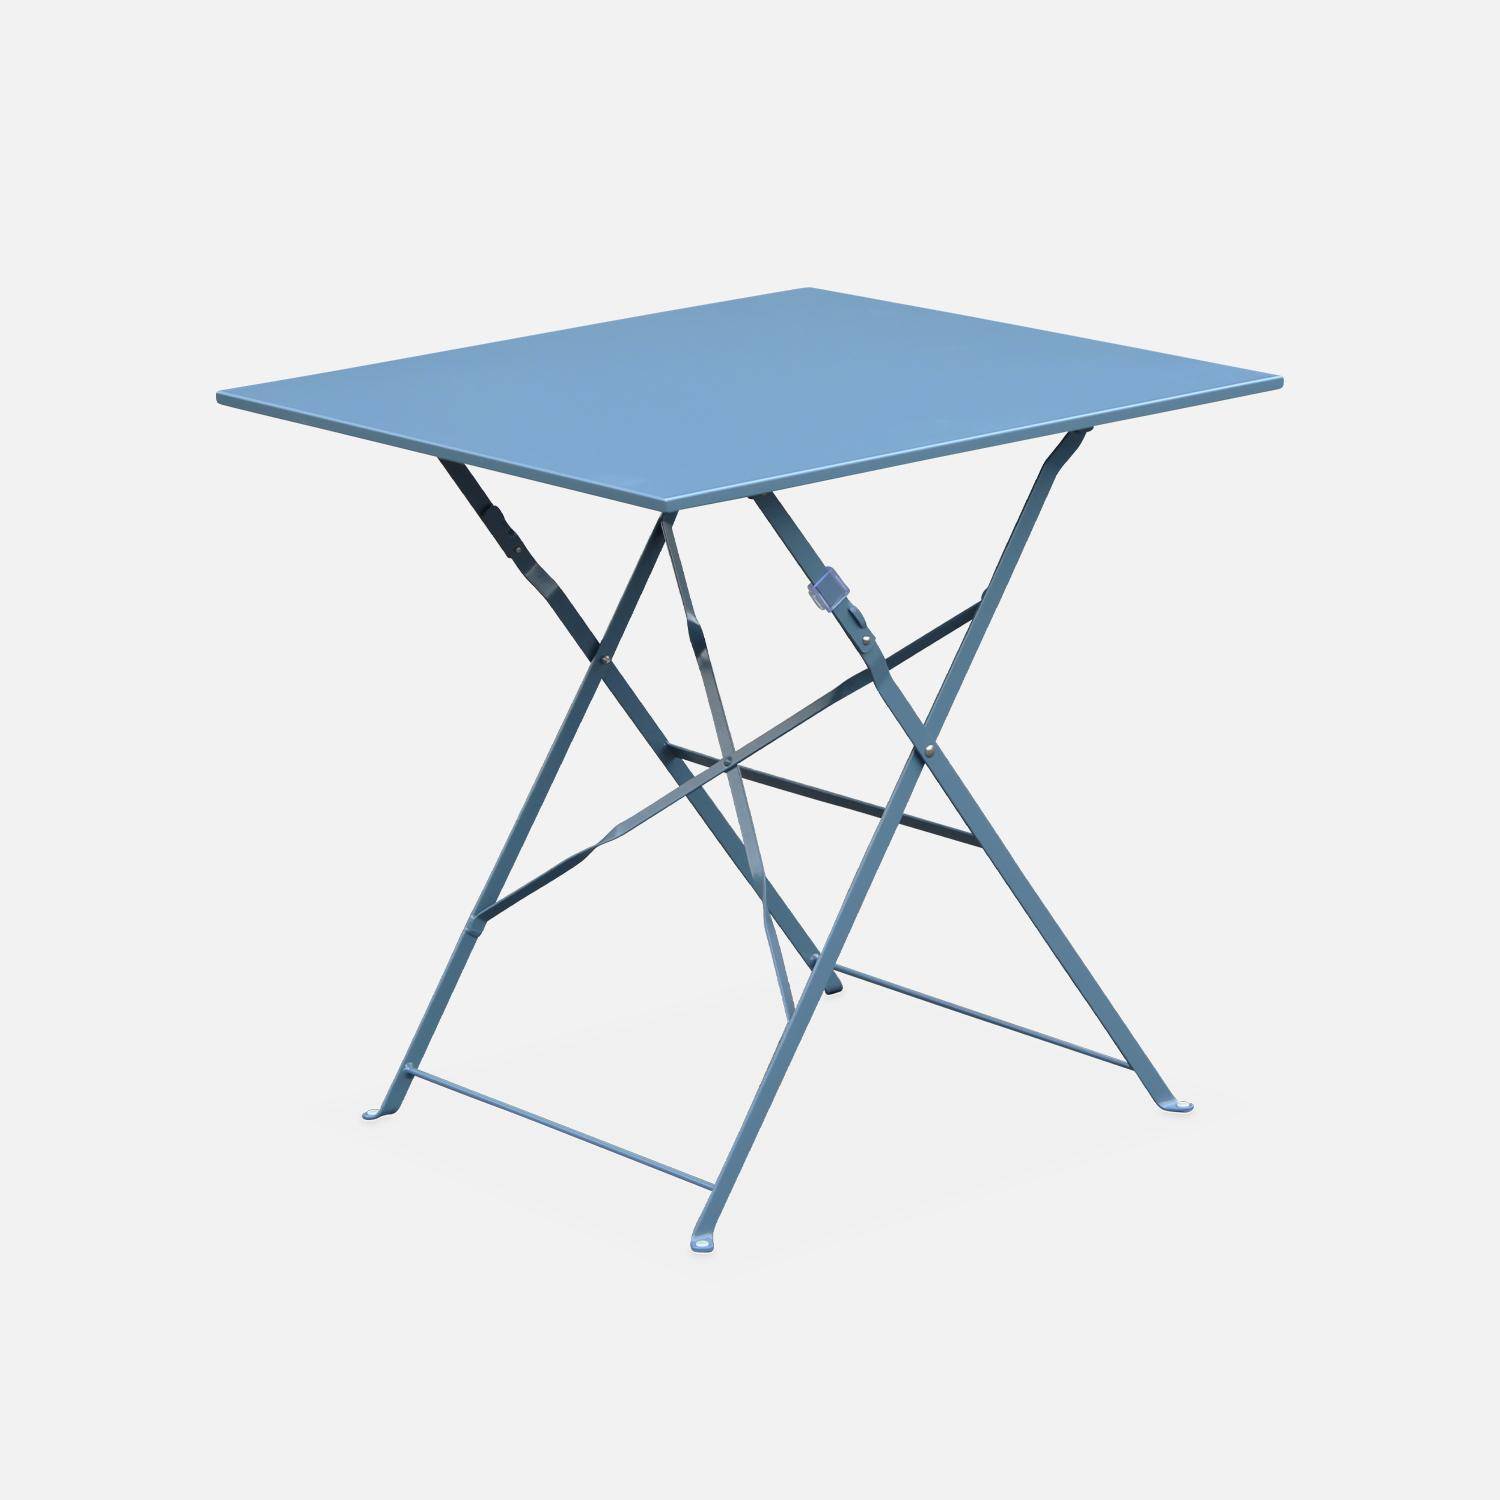 2-seater foldable thermo-lacquered steel bistro garden table, 70x70cm - Emilia - Blue grey Photo3